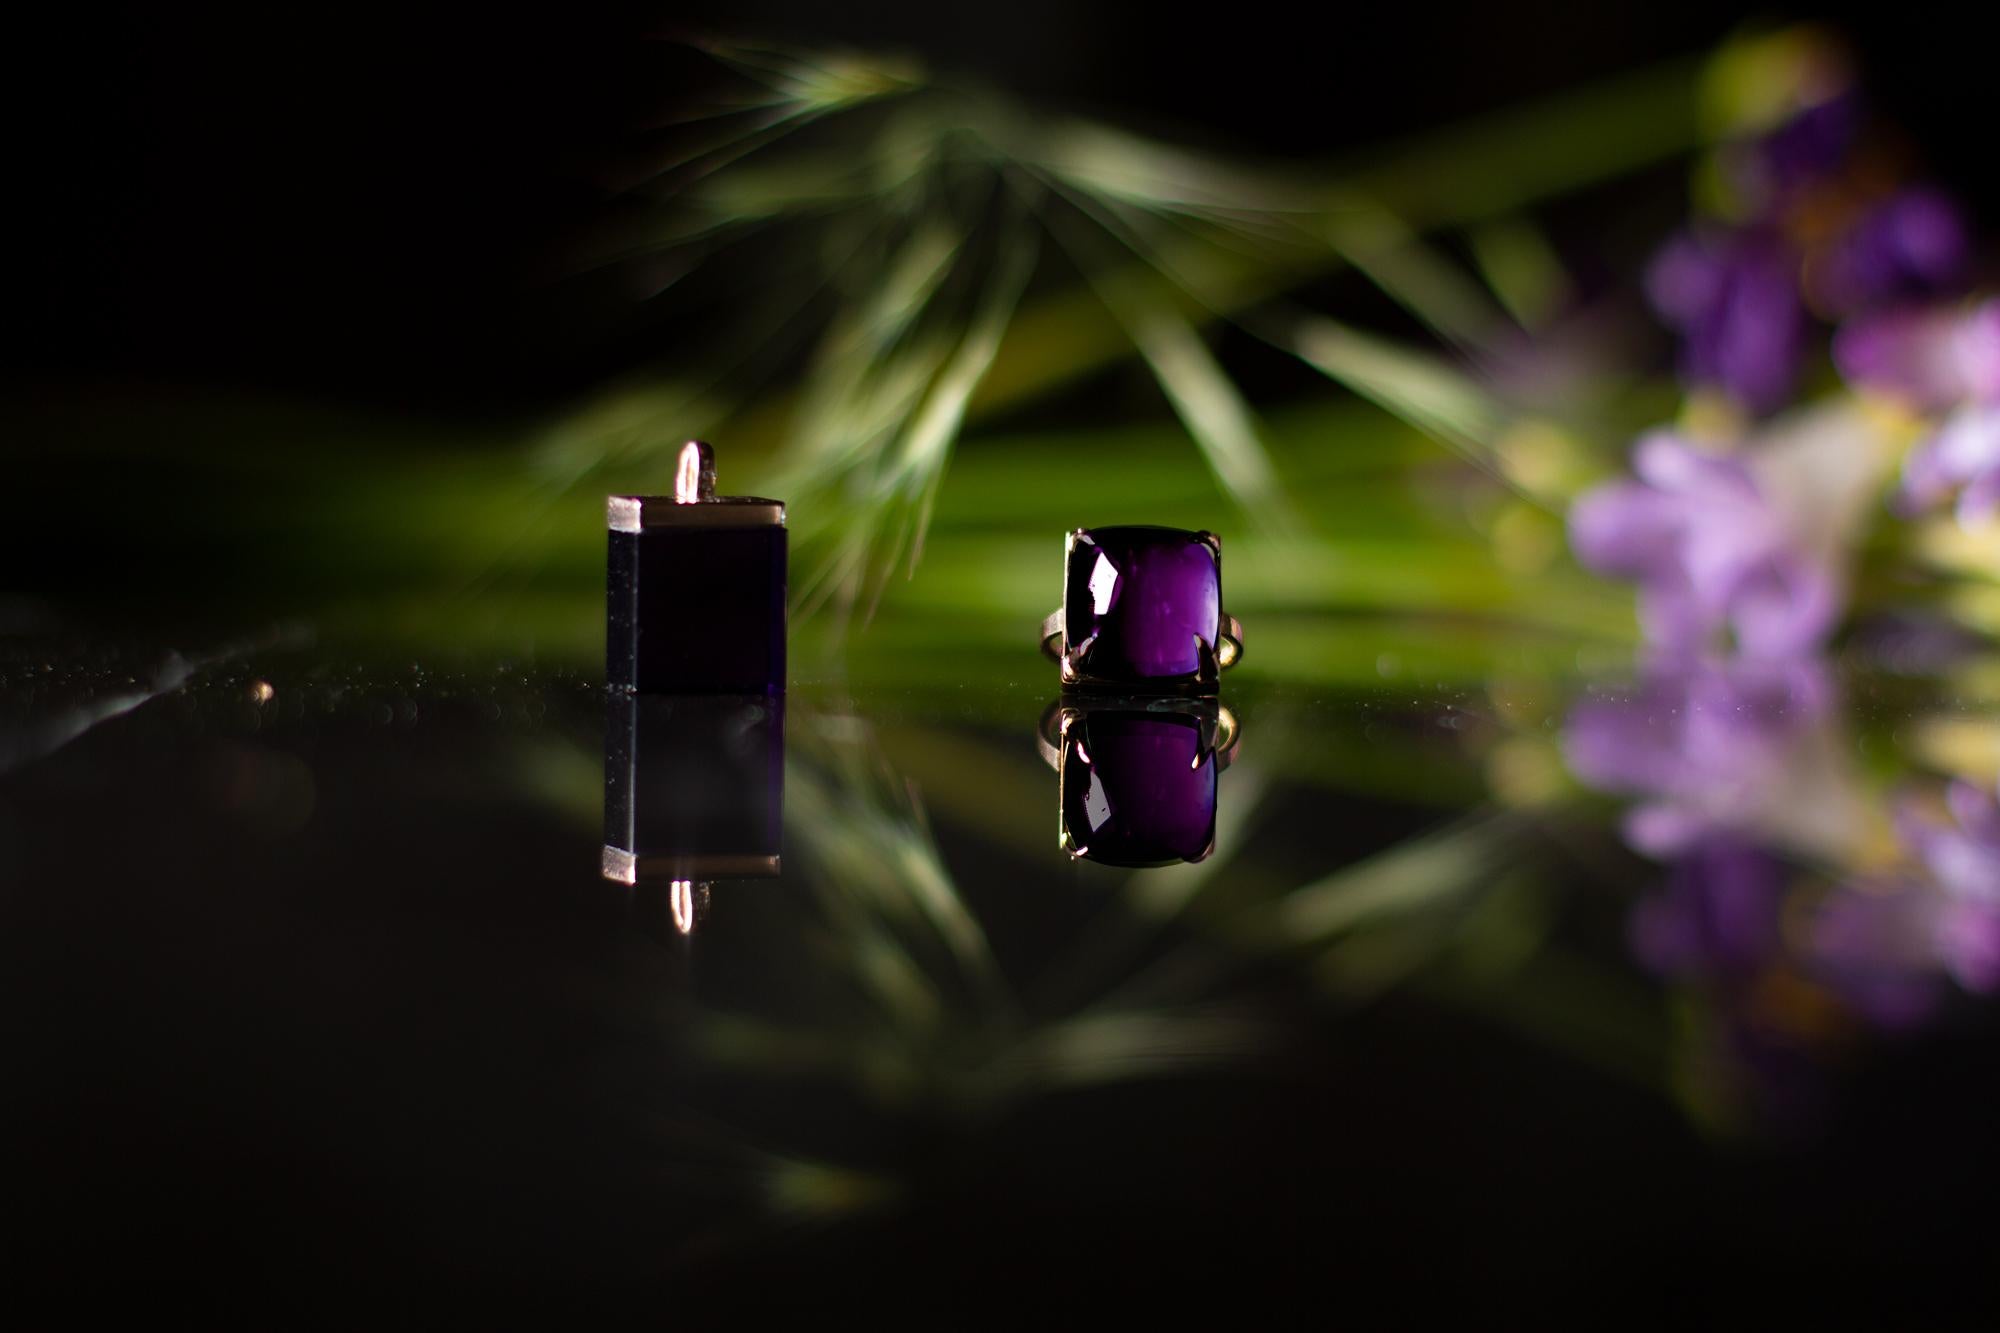 This Engagement ring is made of 18 karat white gold and sugarloaf cut natural amethyst (12x12 mm, 0,47x0,47 inches). 

When for most of the gem it works the way: the smaller prongs the better. This is the shape and size of the gem that we really